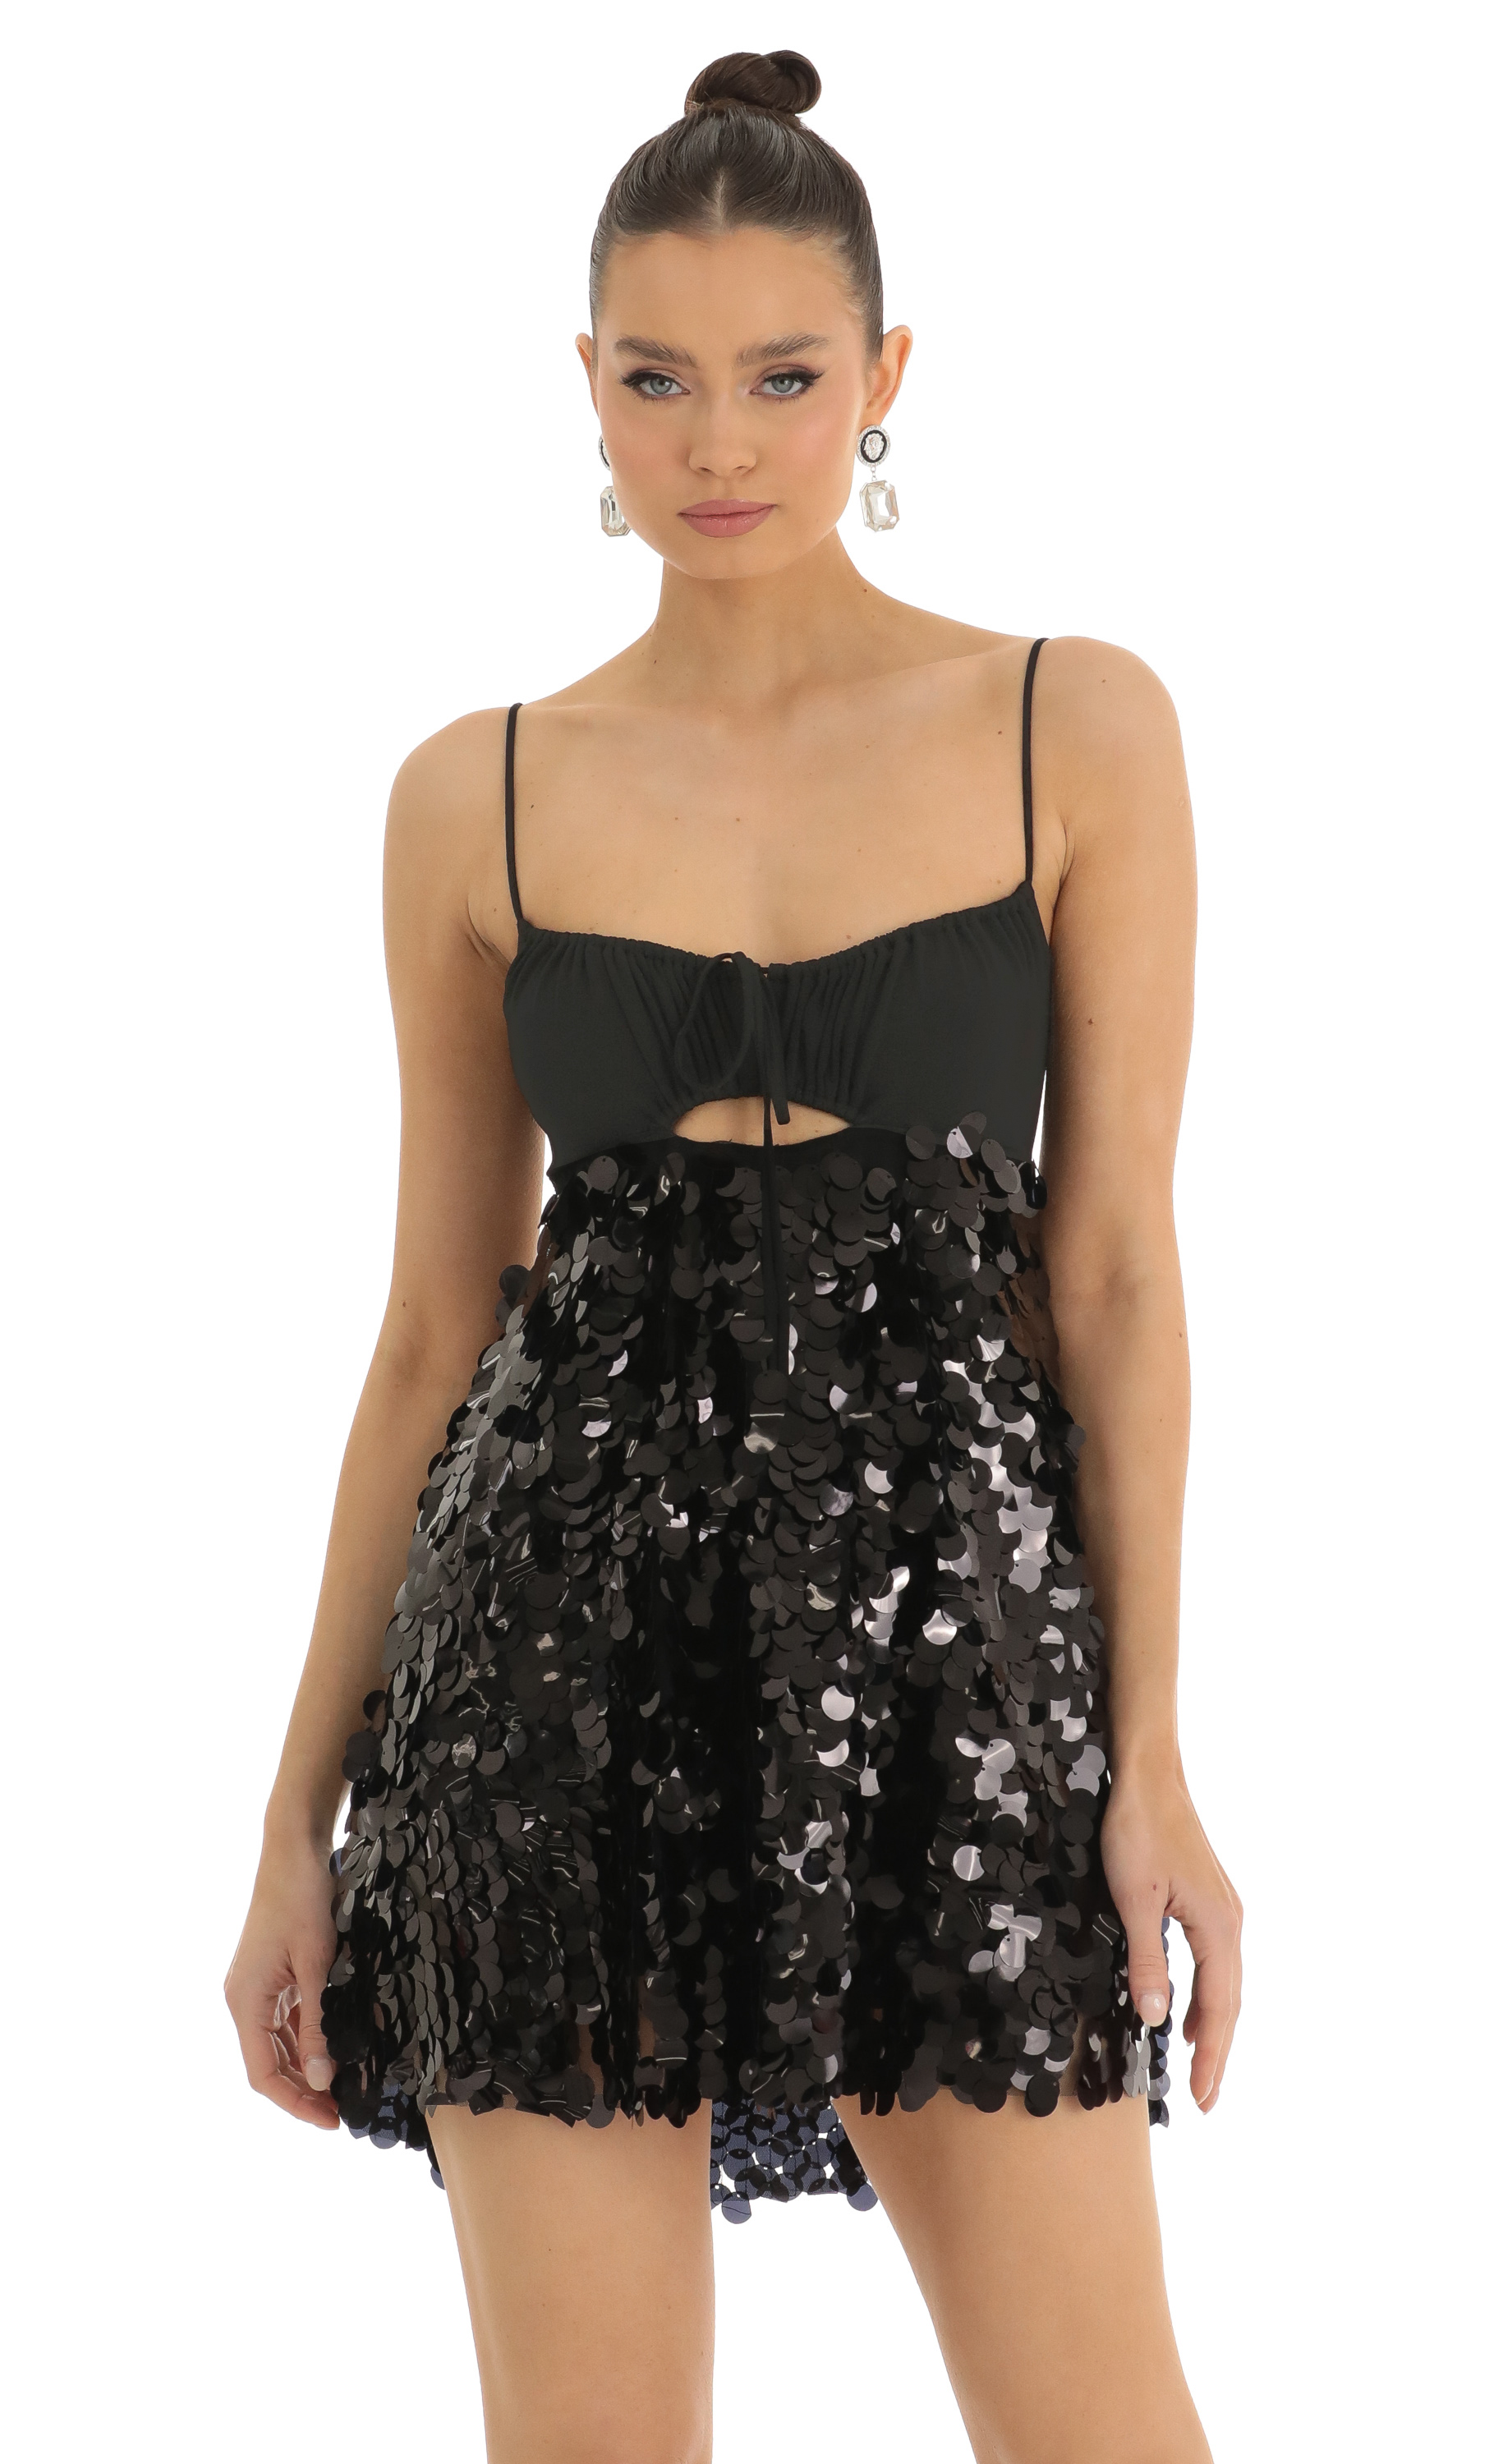 Big Sequin Keyhole Baby Doll Dress is Black